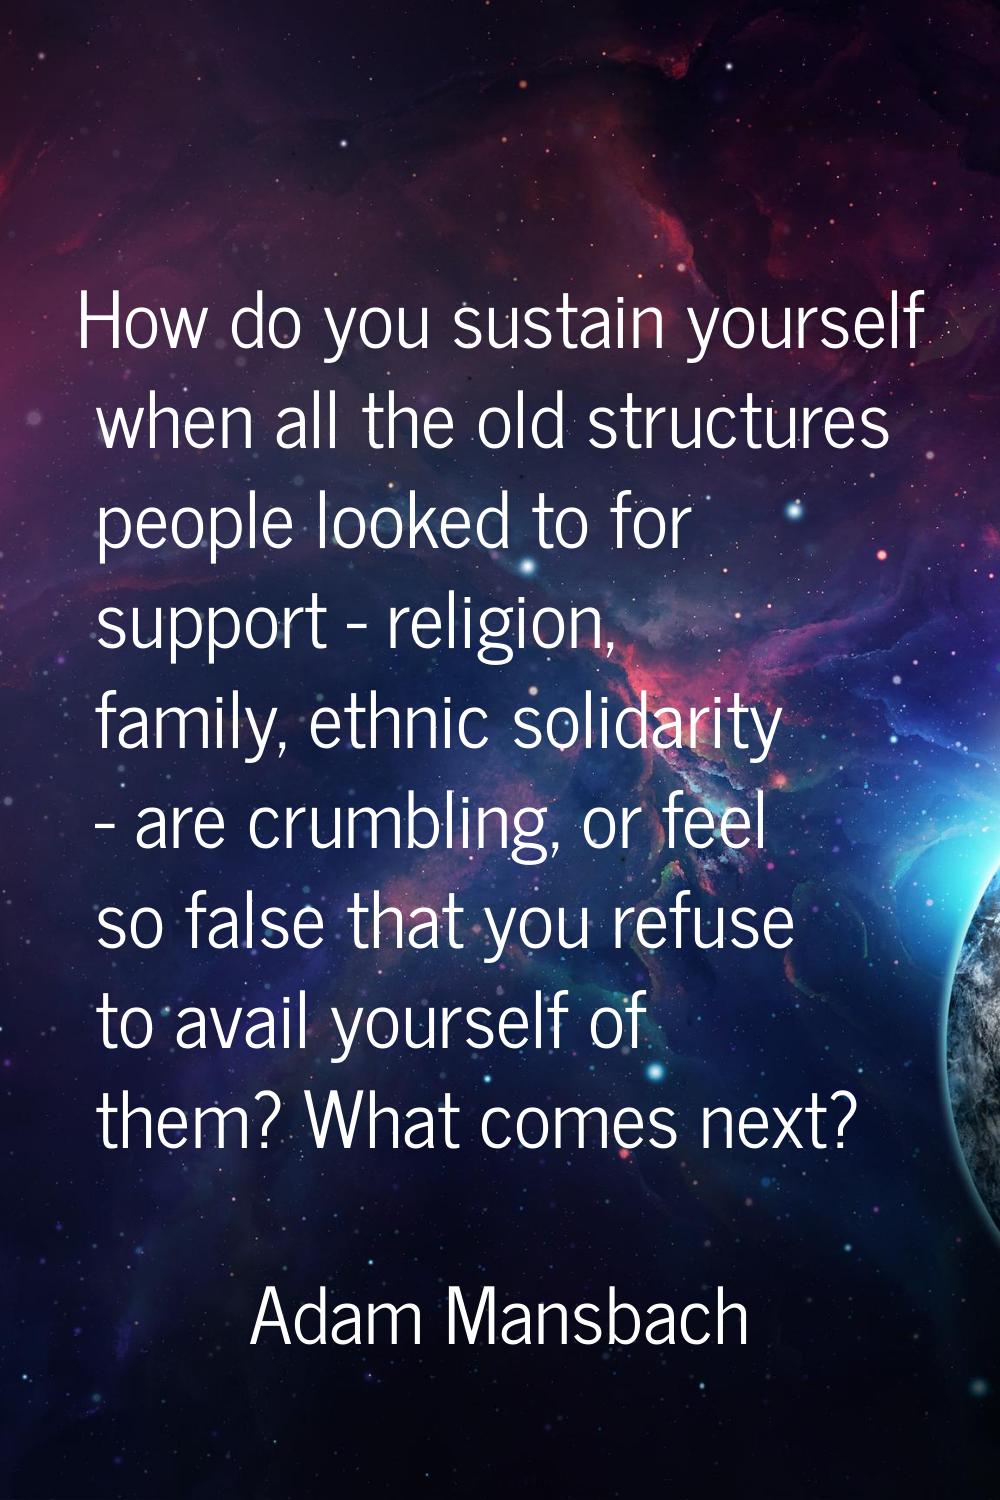 How do you sustain yourself when all the old structures people looked to for support - religion, fa